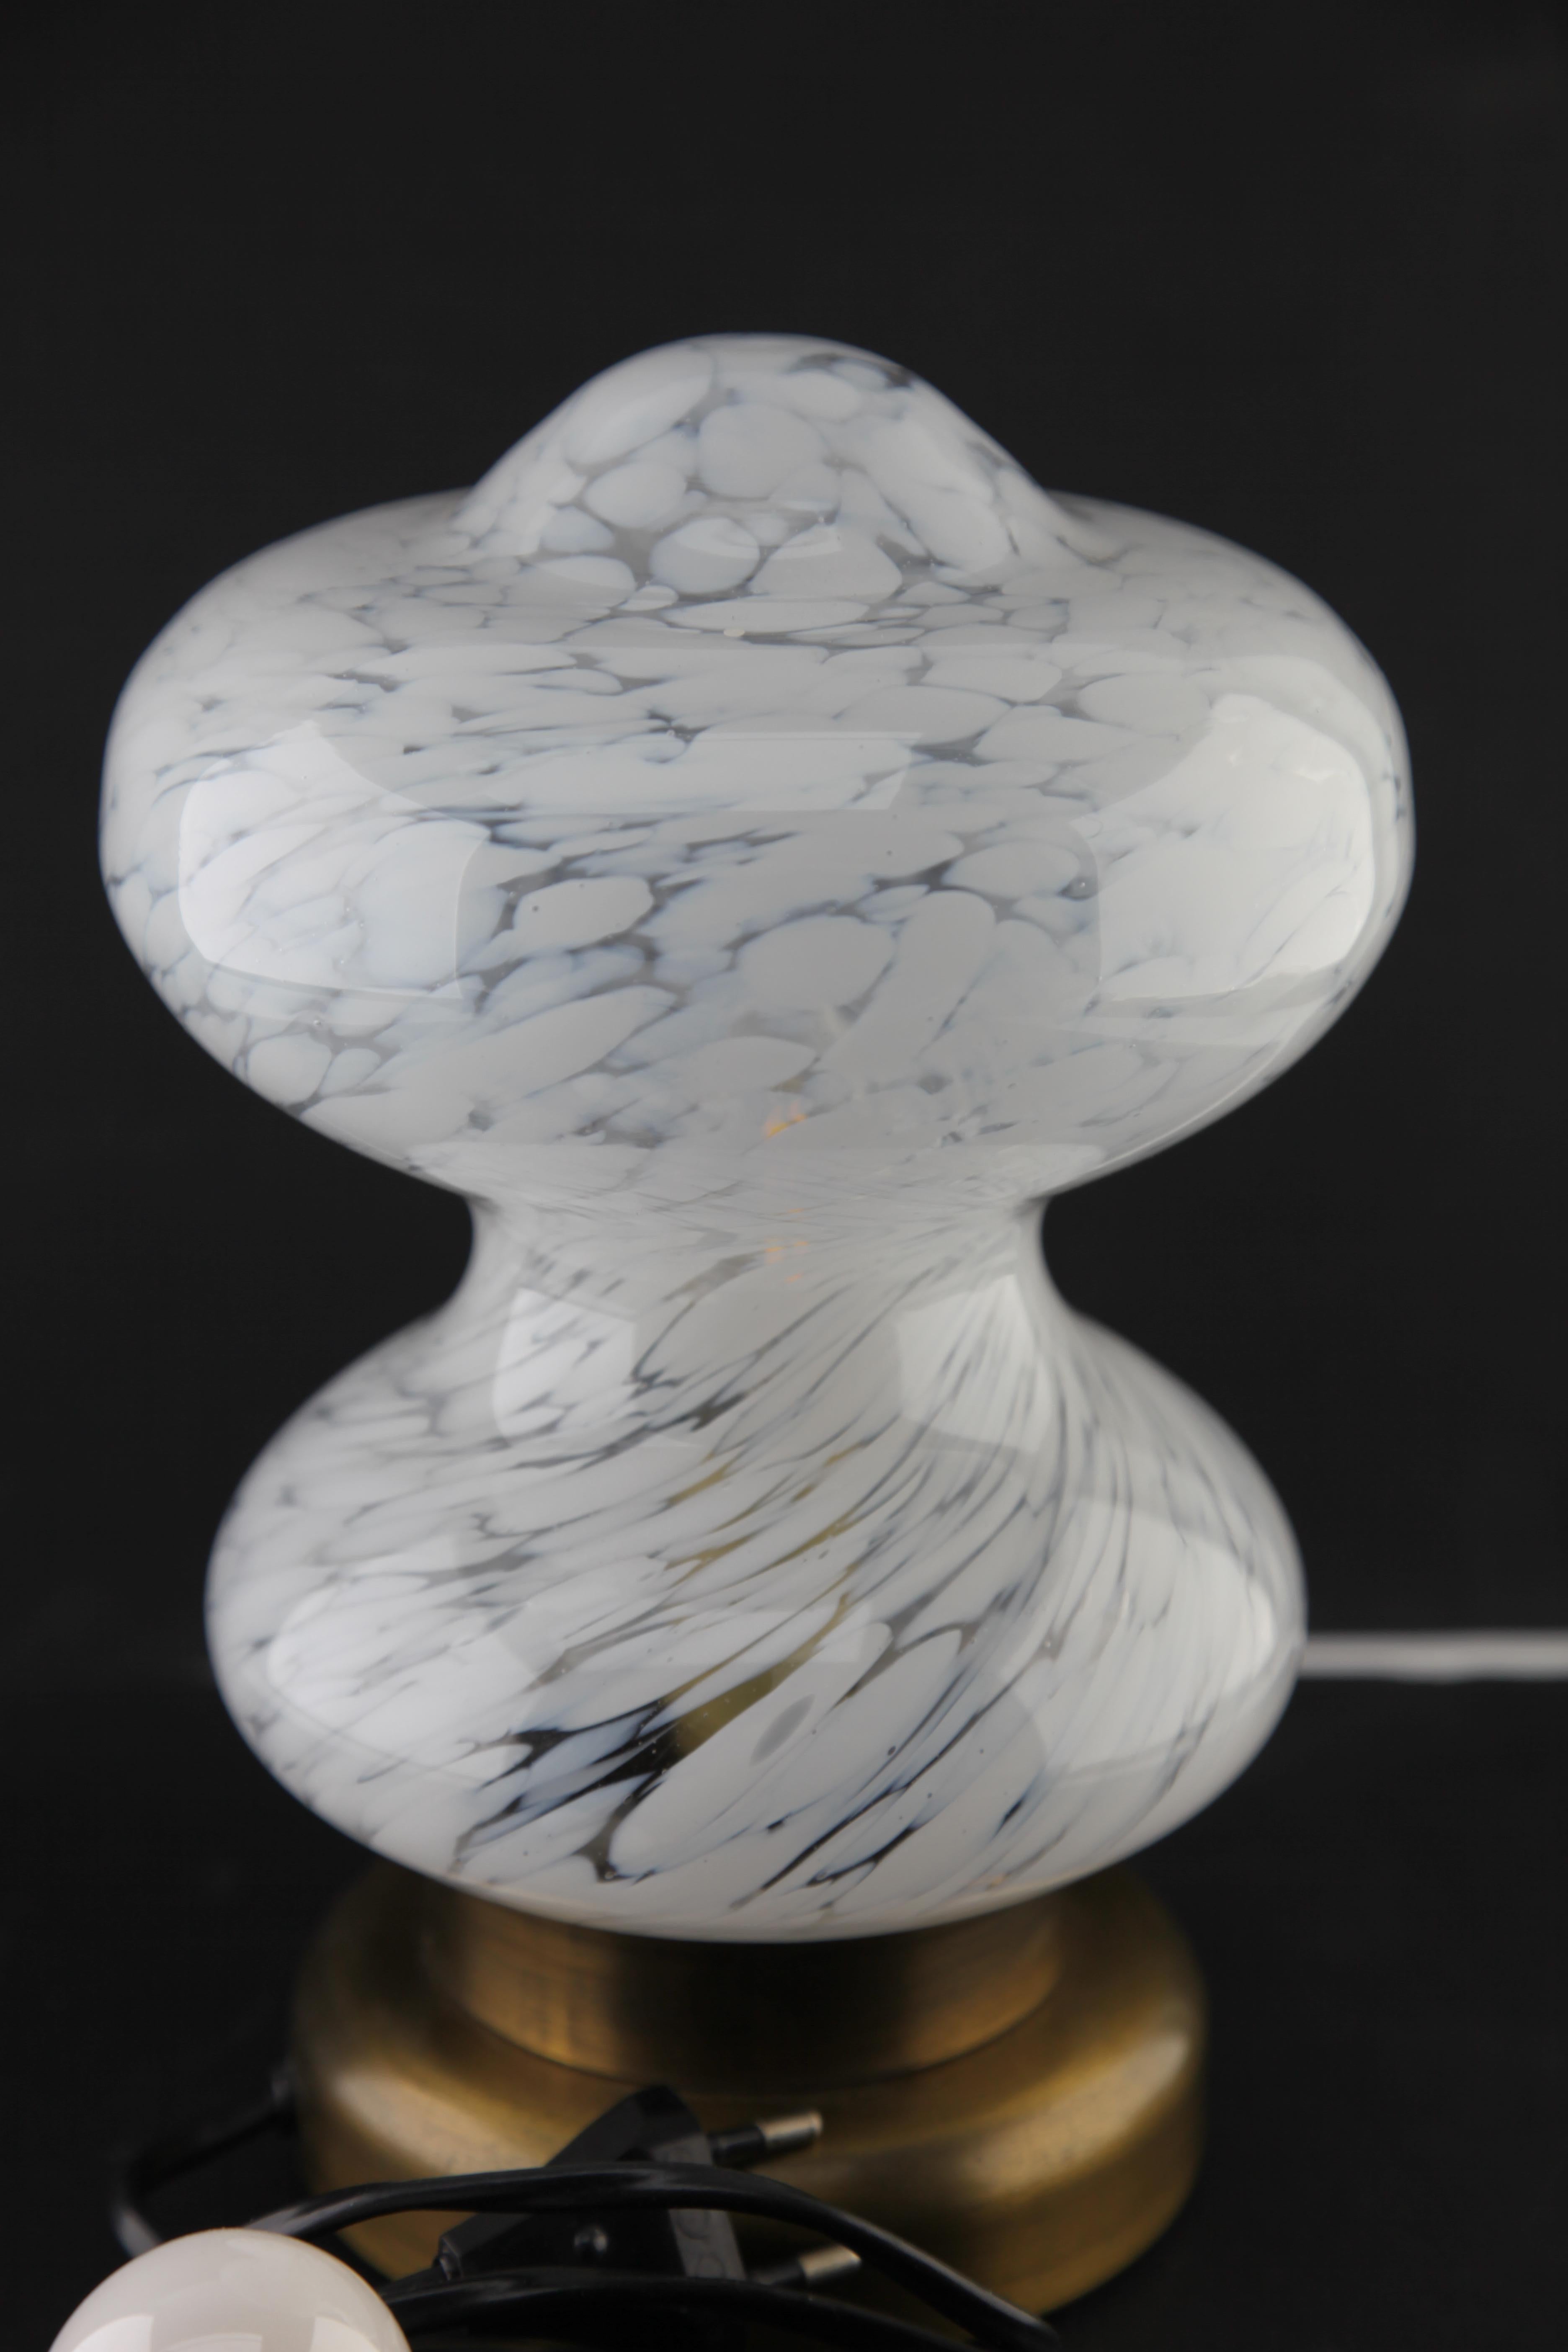 Hollow-footed glass table lamp made by Peill & Putzler in the 1970s. Their unique patterning awareness of light patterns and their use of frosted glass to give a range of white shades was typical of Peill & Putzler's design ethic, focusing on both